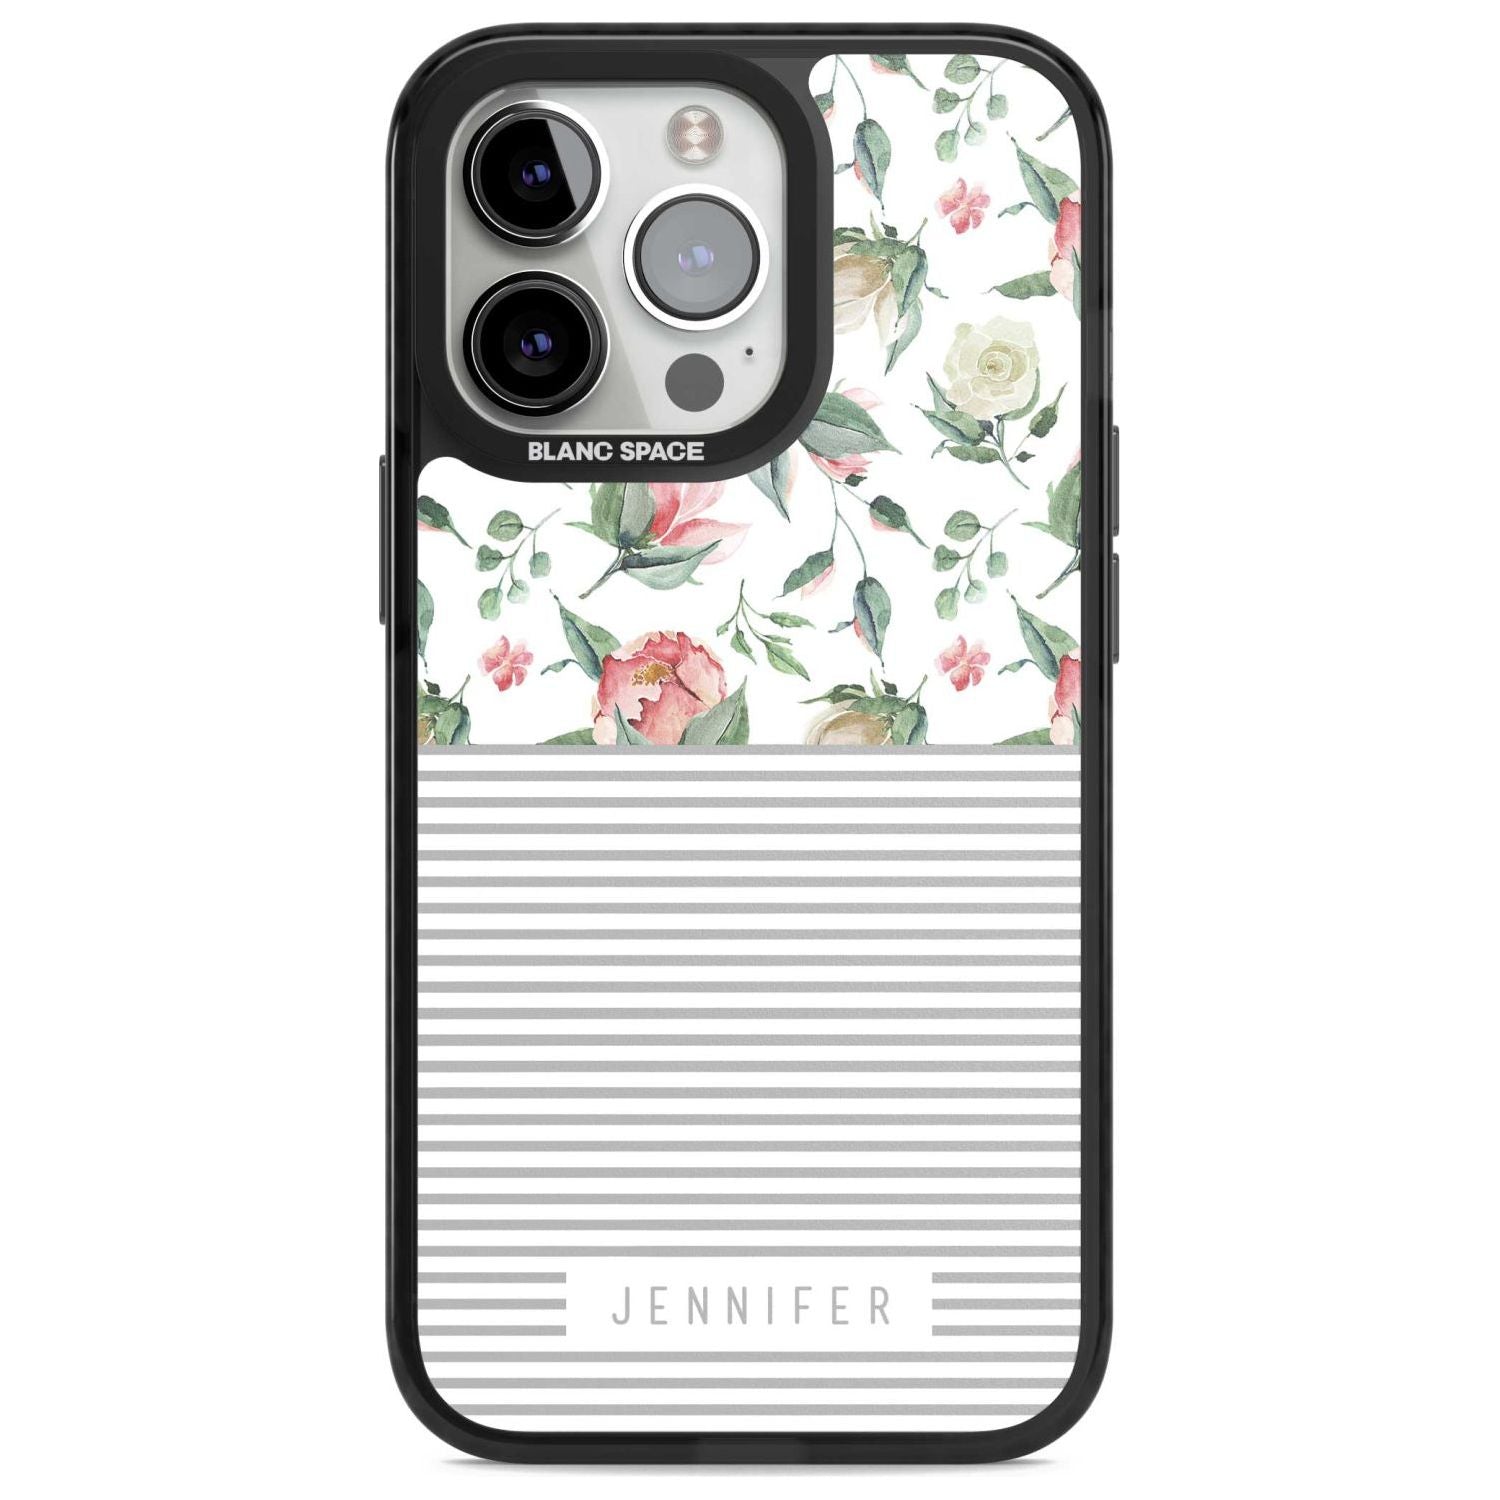 Personalised Light Floral Pattern & Stripes Custom Phone Case iPhone 15 Pro Max / Magsafe Black Impact Case,iPhone 15 Pro / Magsafe Black Impact Case,iPhone 14 Pro Max / Magsafe Black Impact Case,iPhone 14 Pro / Magsafe Black Impact Case,iPhone 13 Pro / Magsafe Black Impact Case Blanc Space